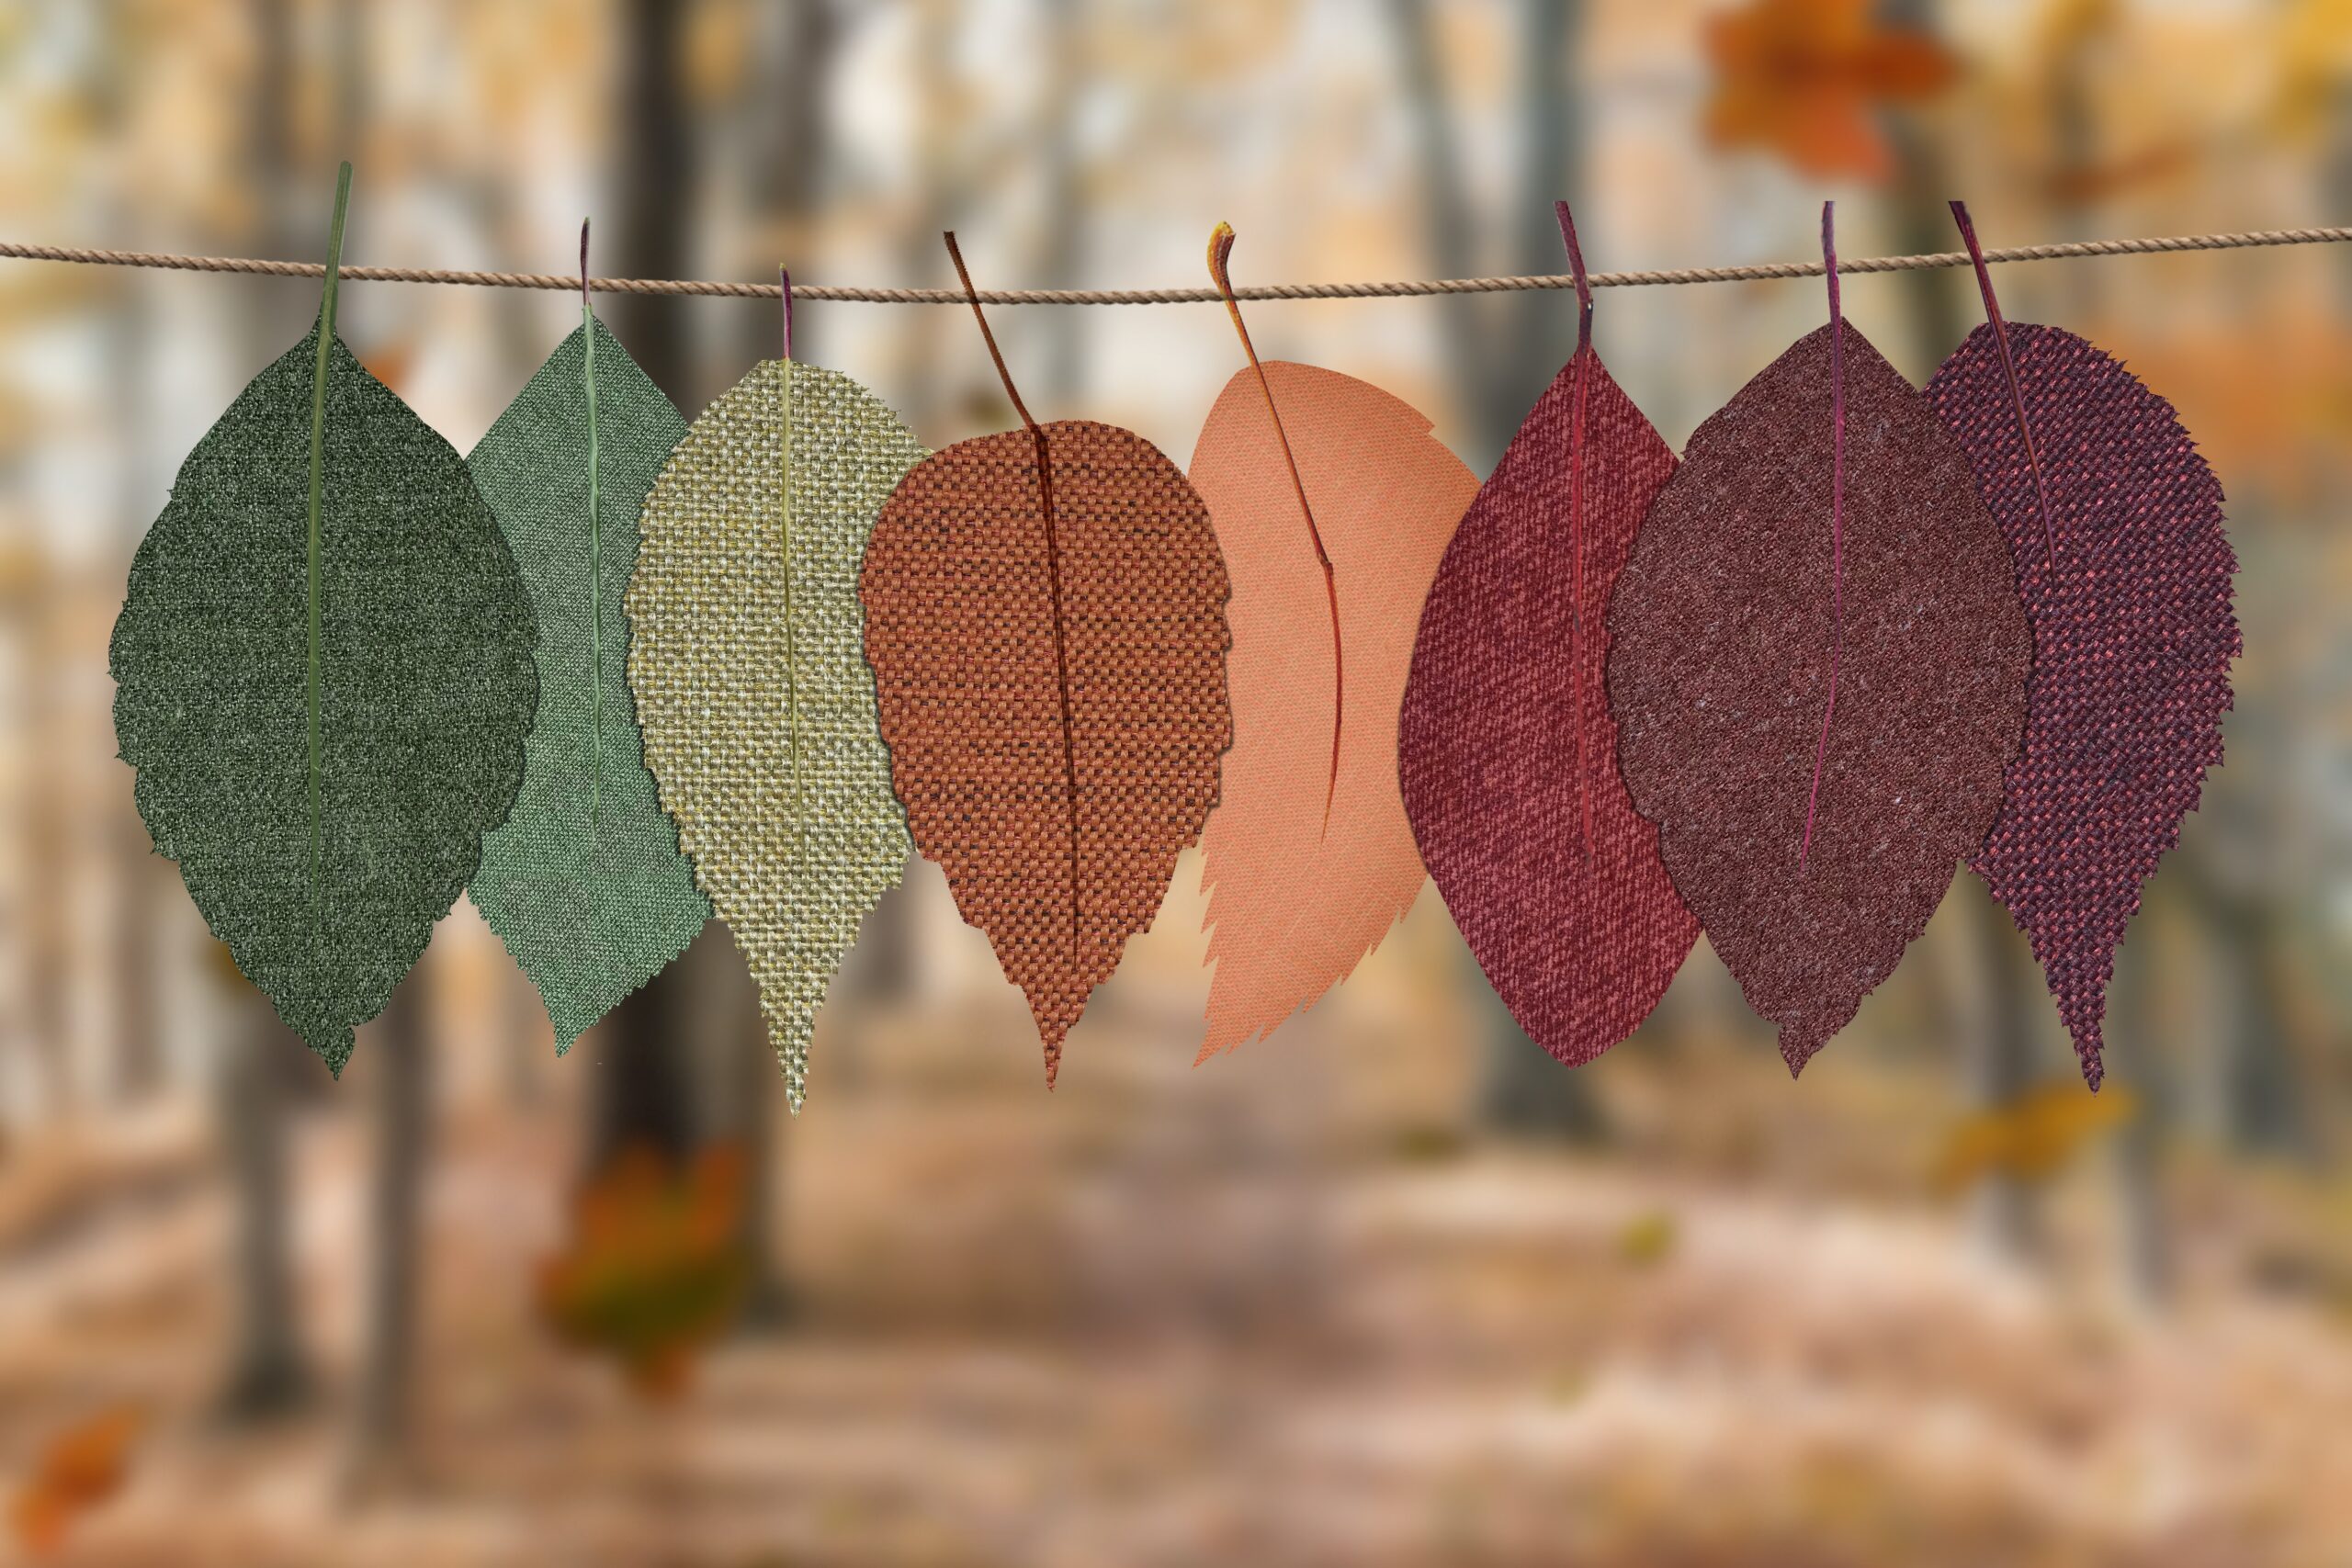 leaves of different colors hanging on a line